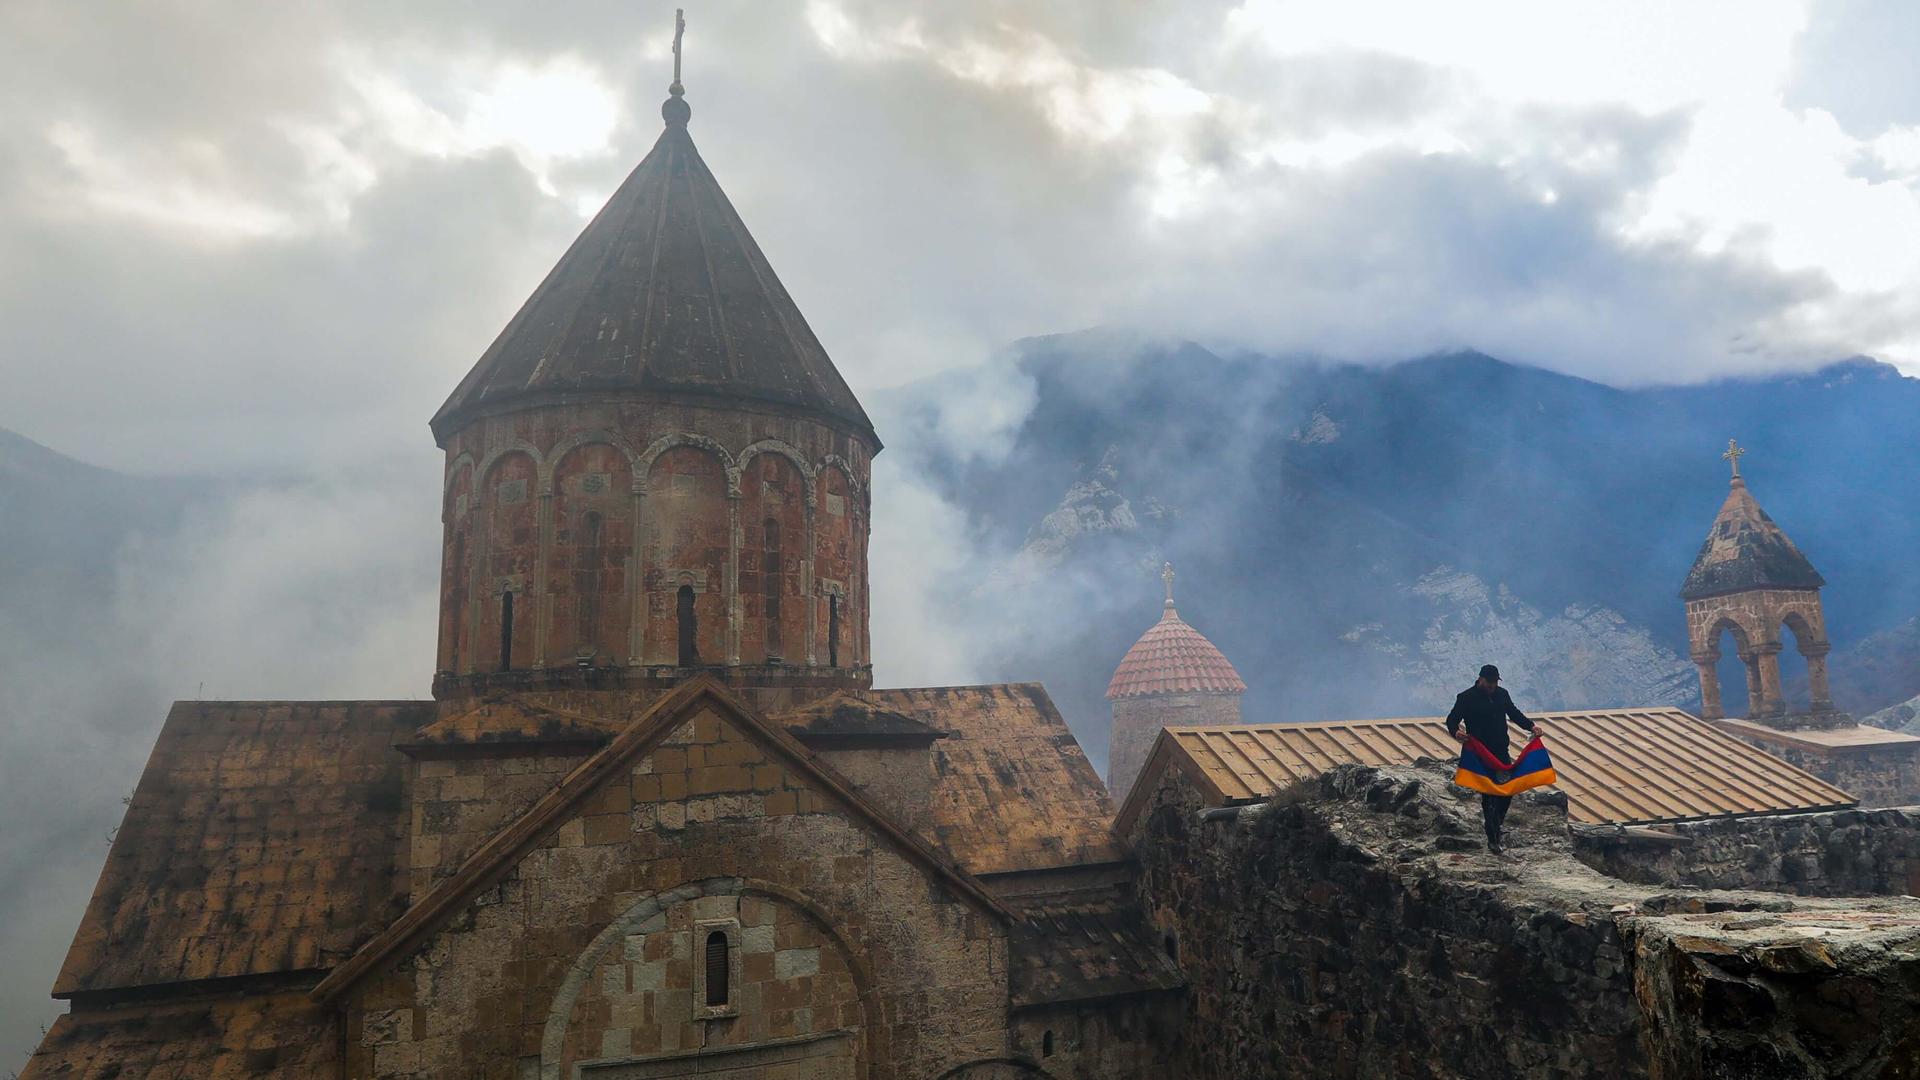 A man with an Armenian national flag visits a 12th-13th an old brick monastery surrounded by mountain vistas